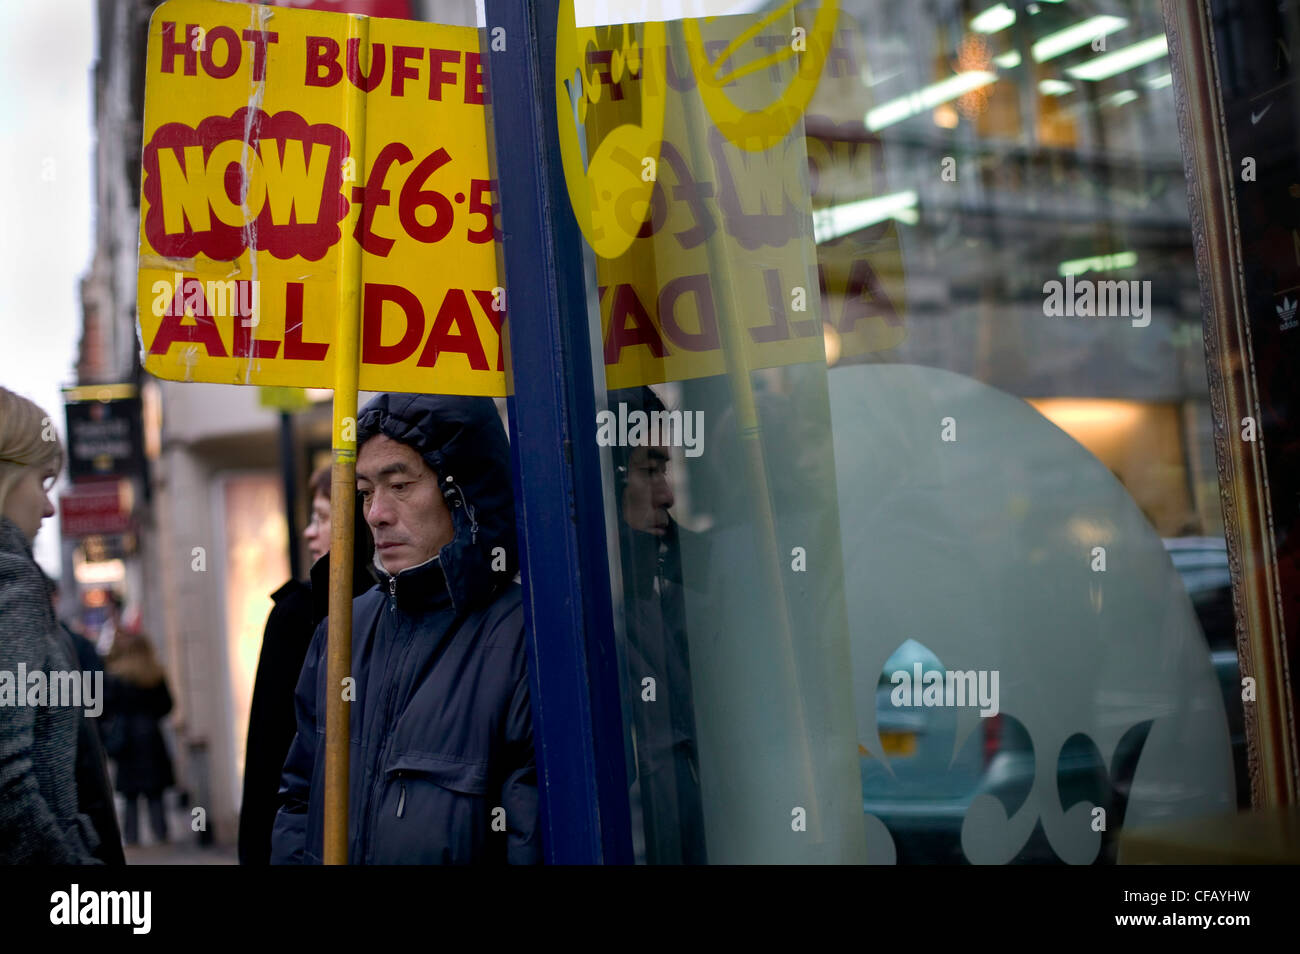 Man with resturant sign in rain, Chinatown, London. Stock Photo